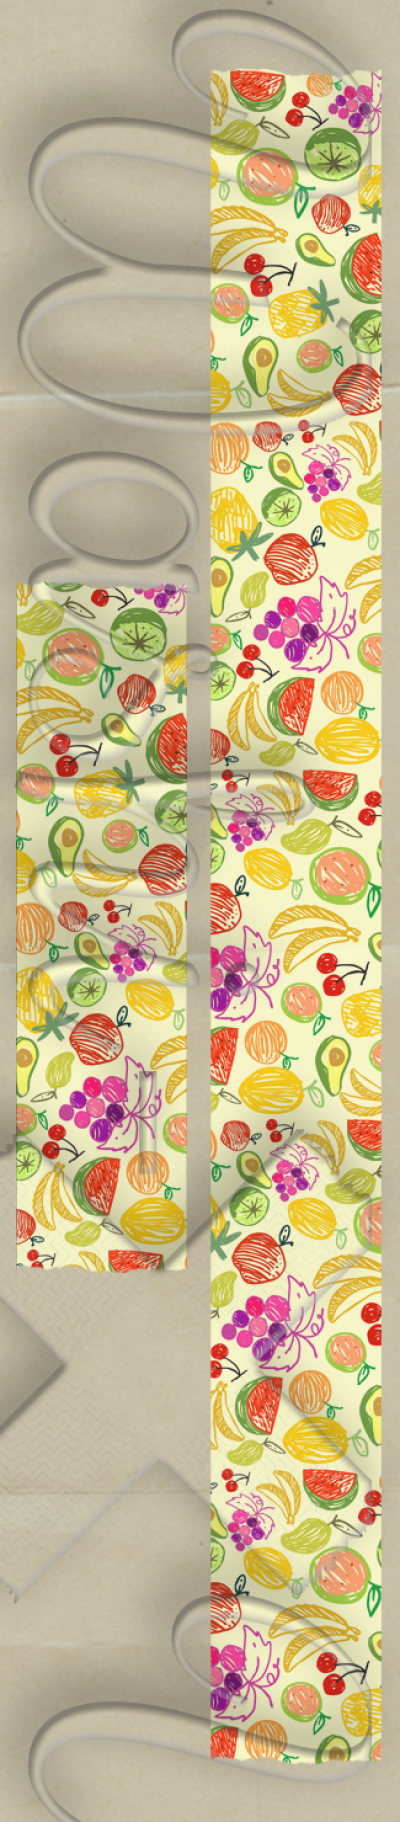 Painted fruits patterned washi tape